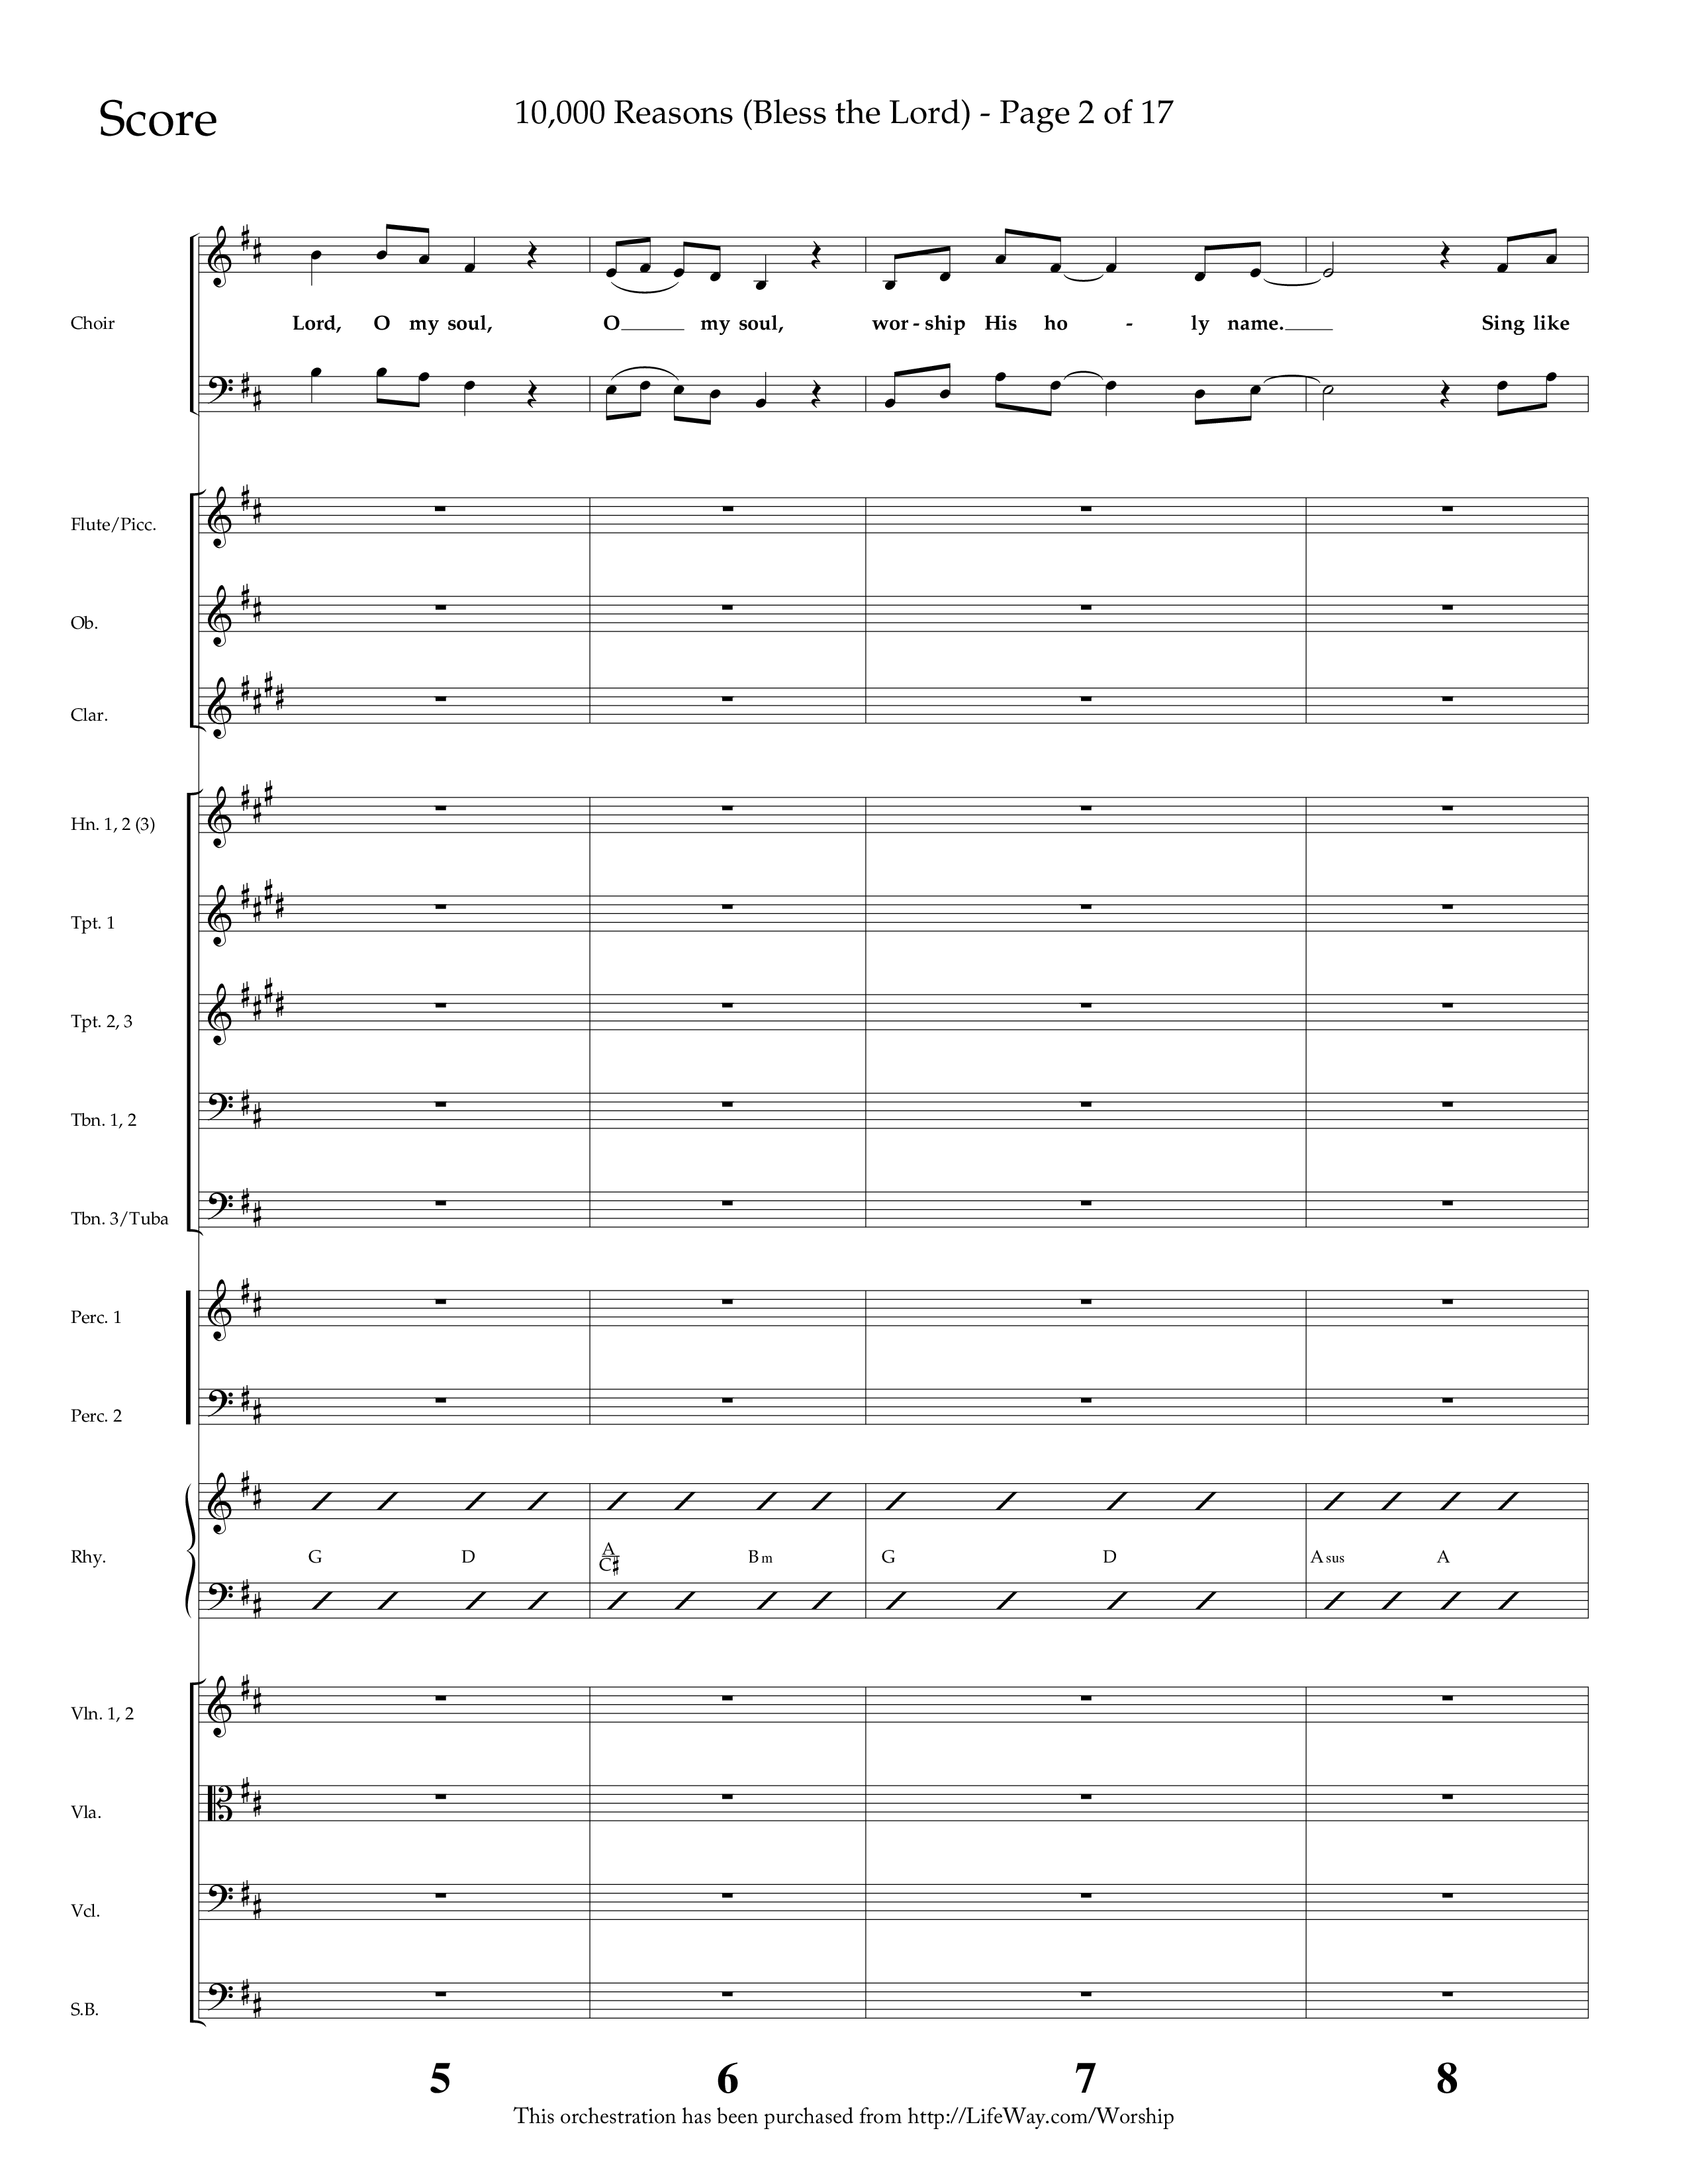 10,000 Reasons (Bless The Lord) (Choral Anthem SATB) Conductor's Score (Lifeway Choral / Arr. Dave Williamson)